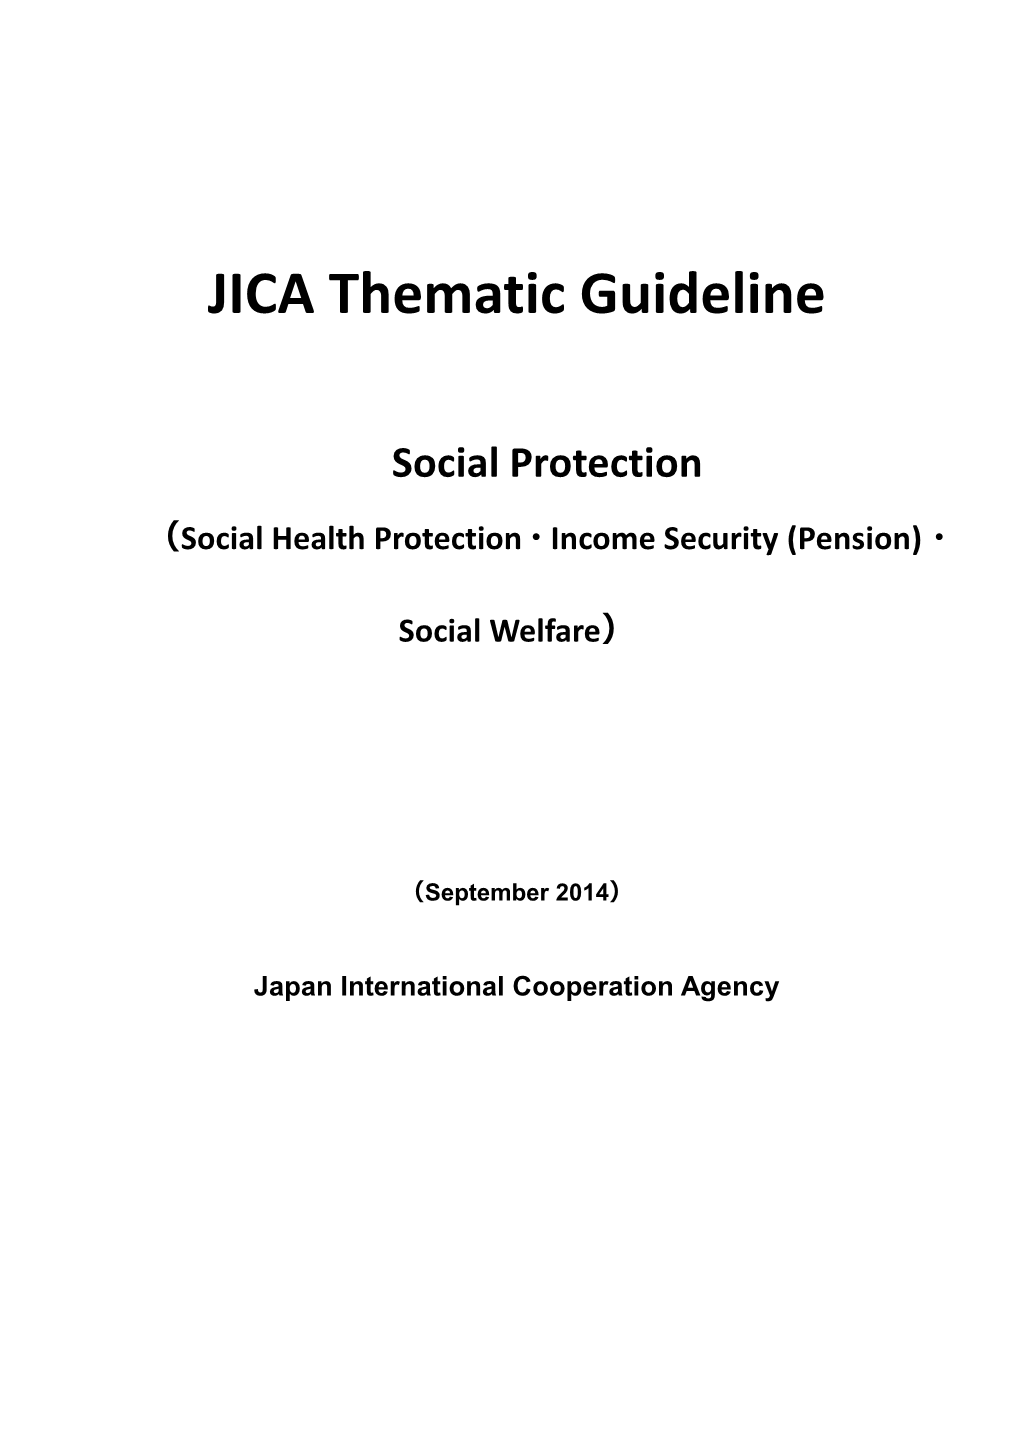 JICA Thematic Guideline Social Protection